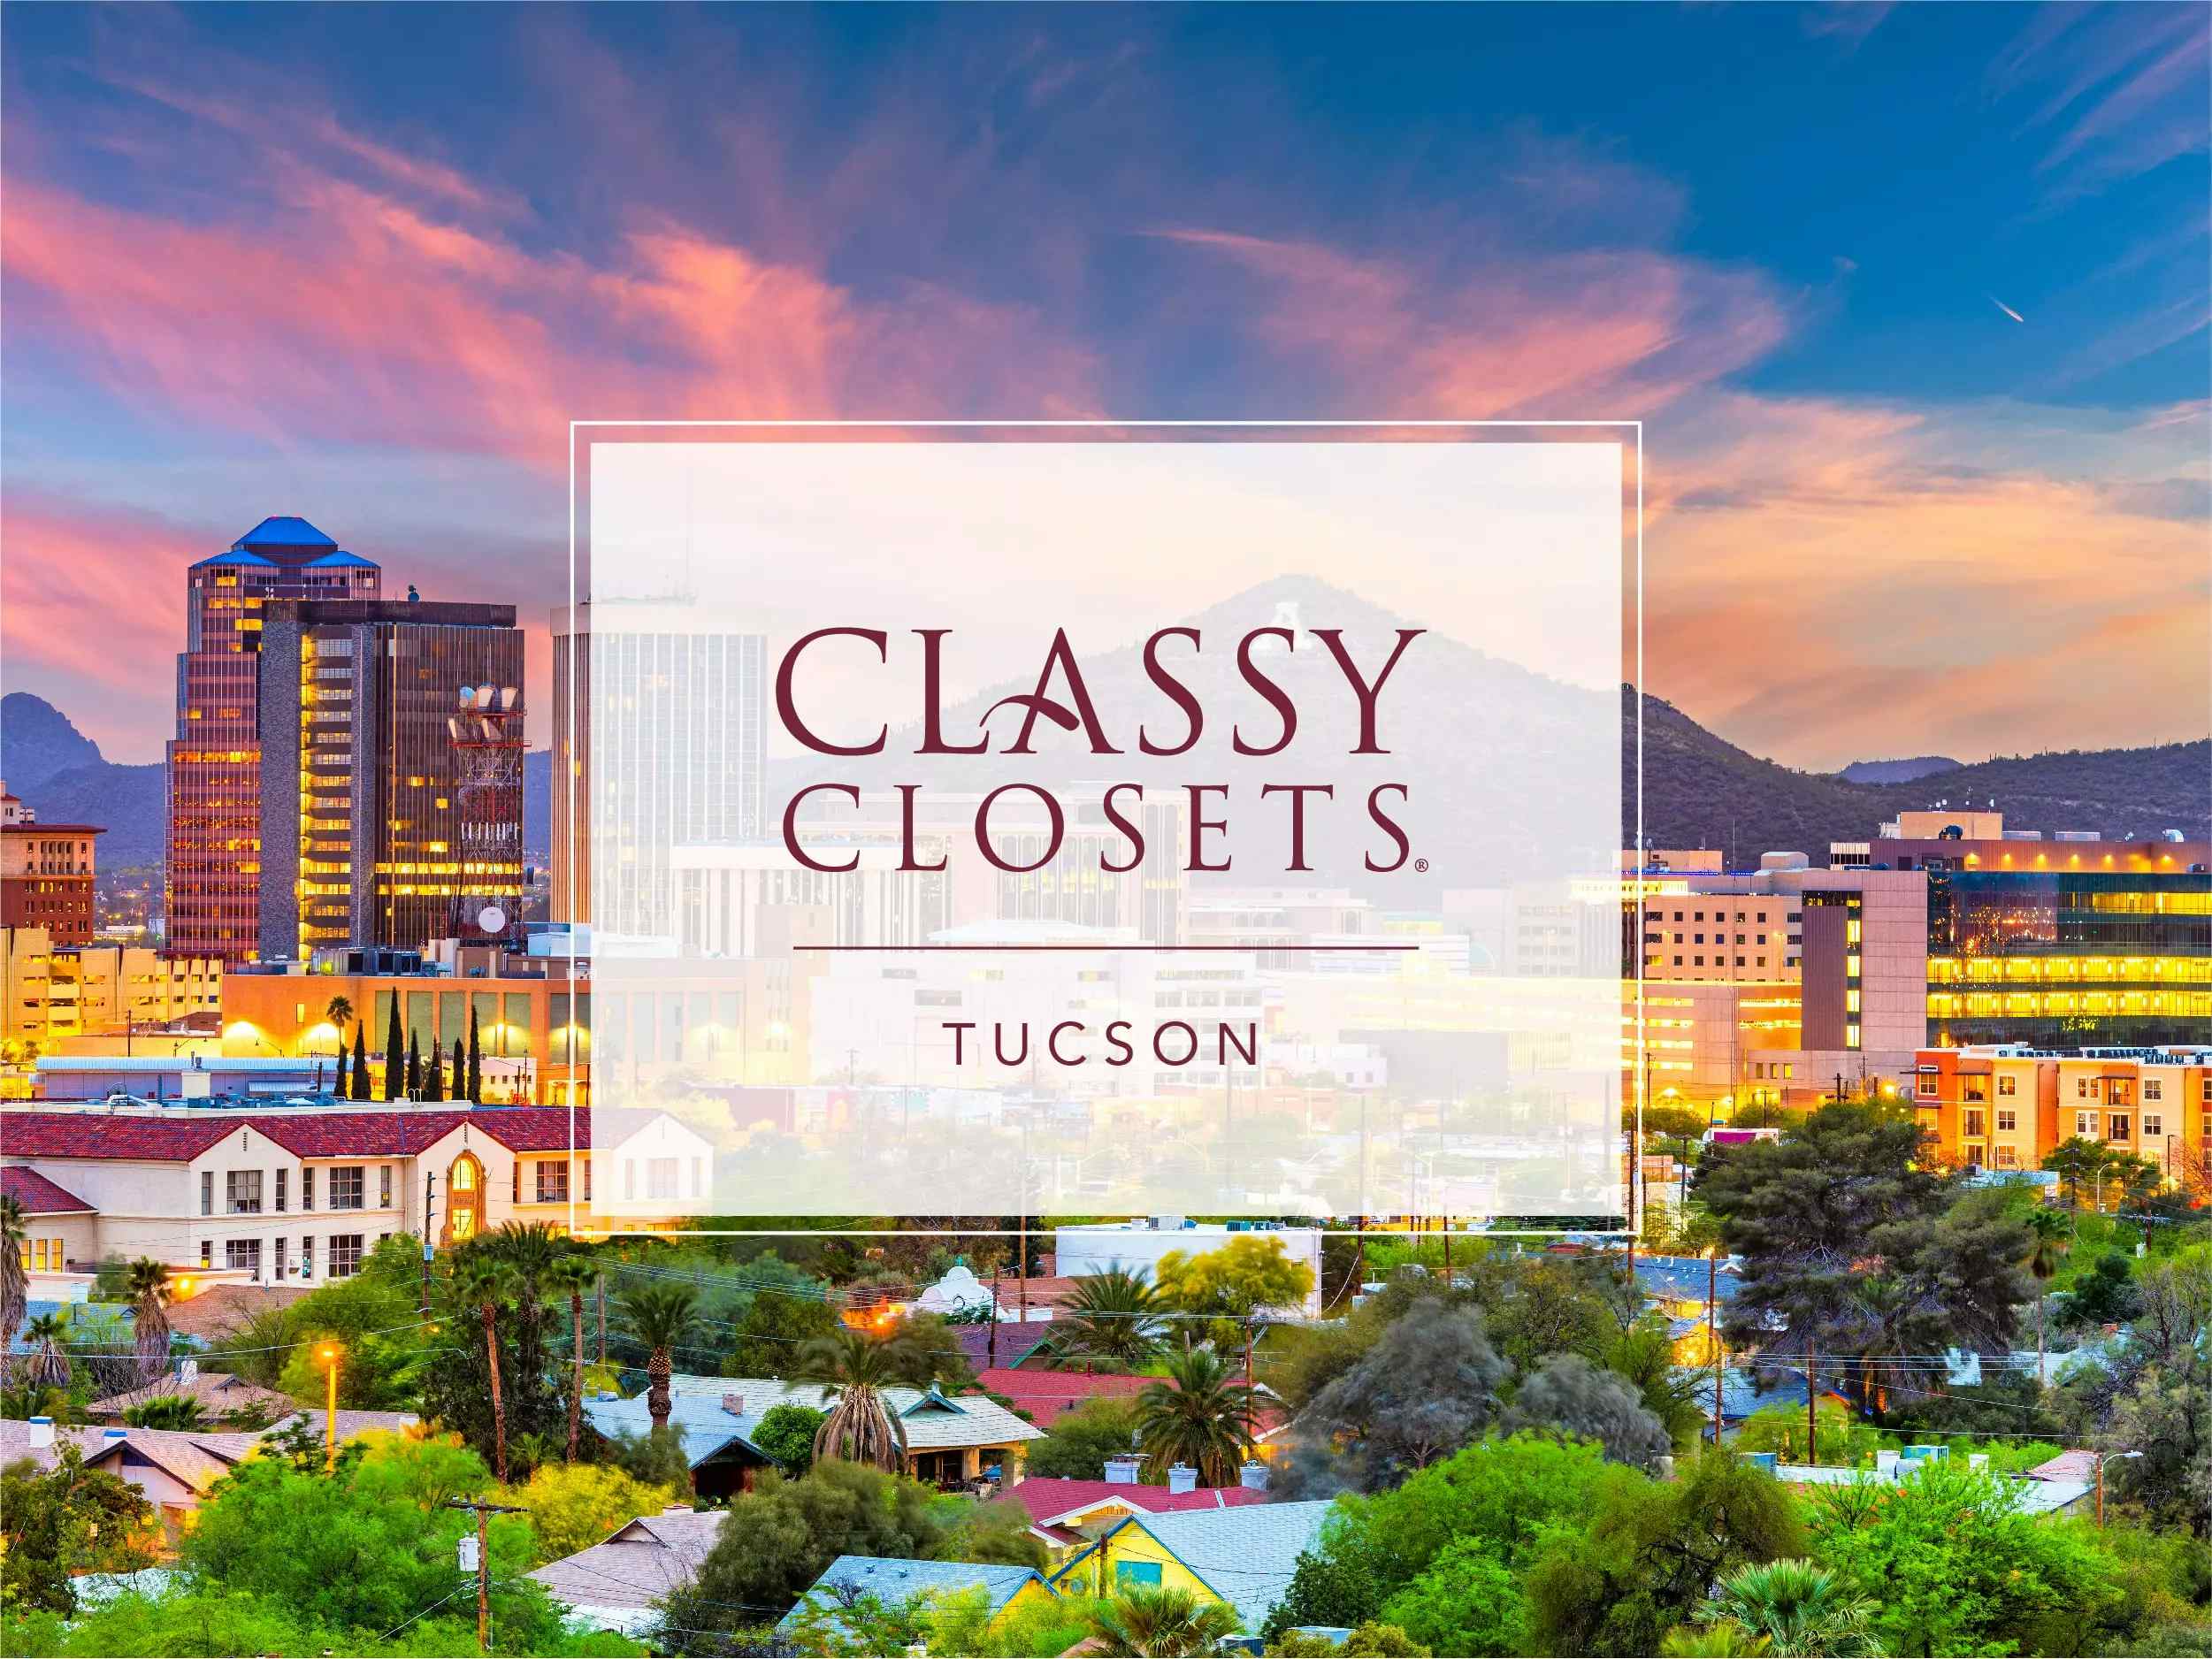 showroom on the location page-/images/locations/Tucson.webp